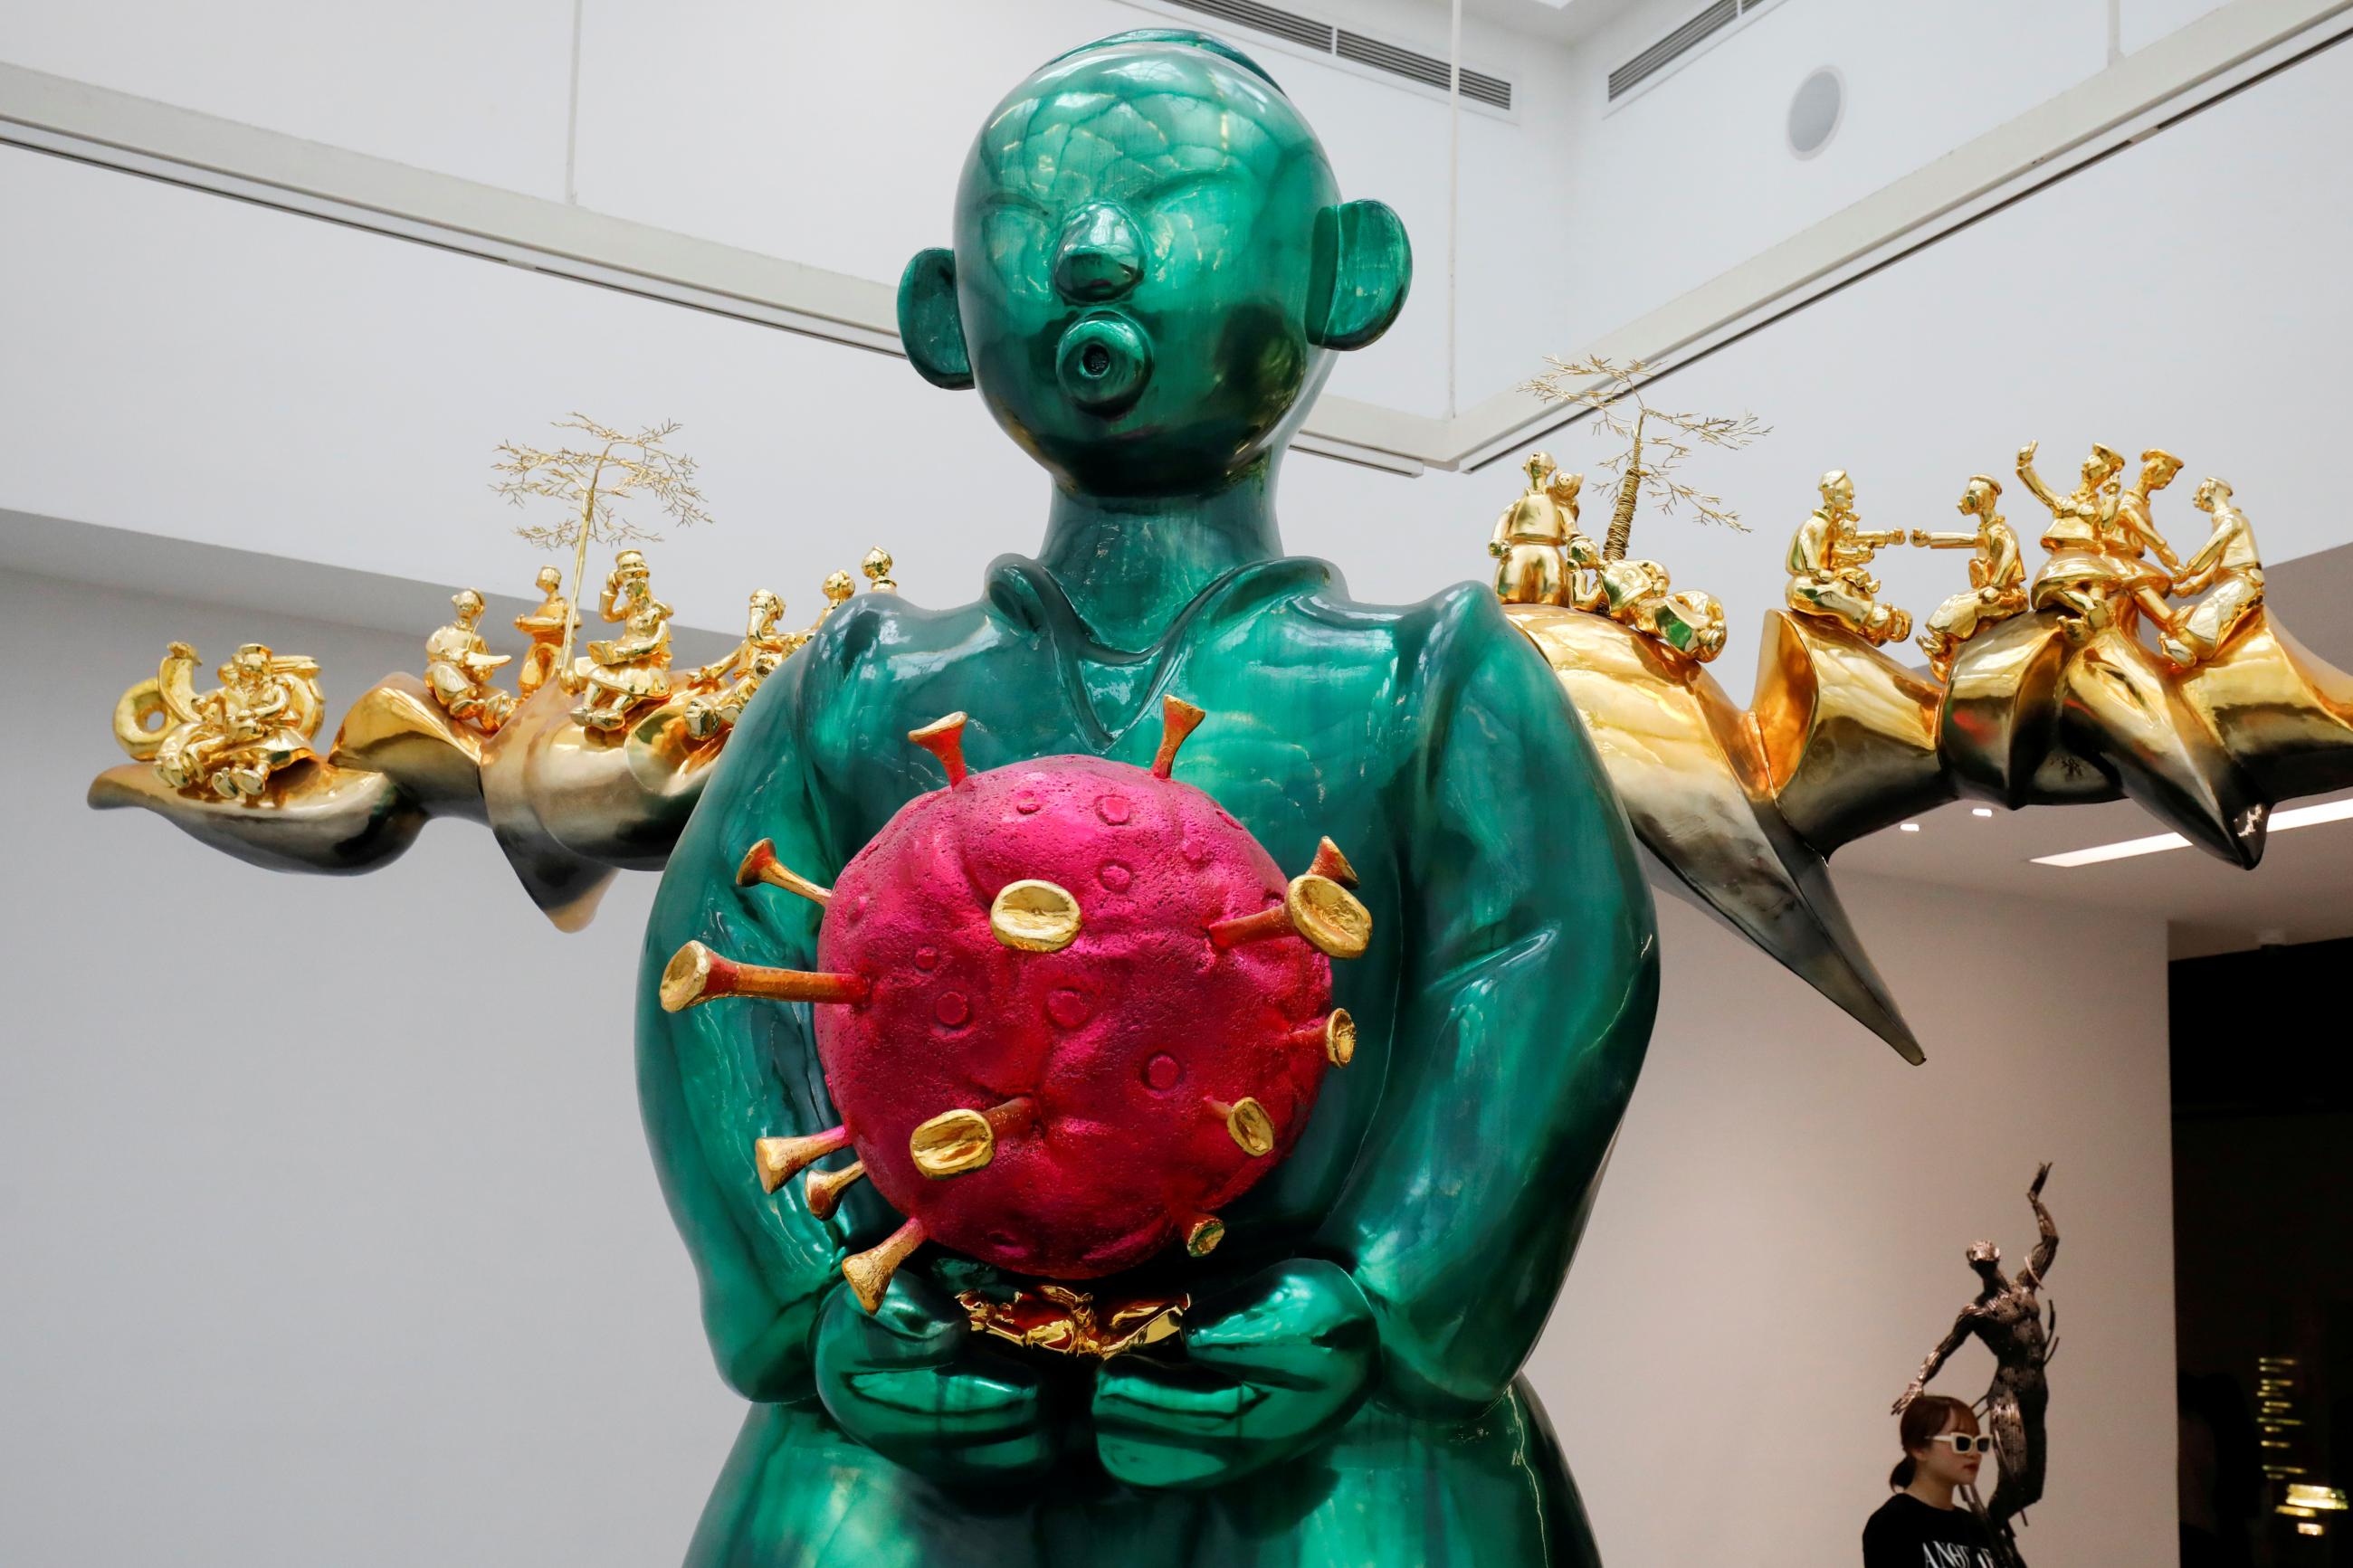 A visitor poses near a green, red, and gold coronavirus-shaped sculpture by artist Pham Thai Binh during an art exhibition at Vincom Center for Contemporary Art in Hanoi, Vietnam, on October 12, 2020. 